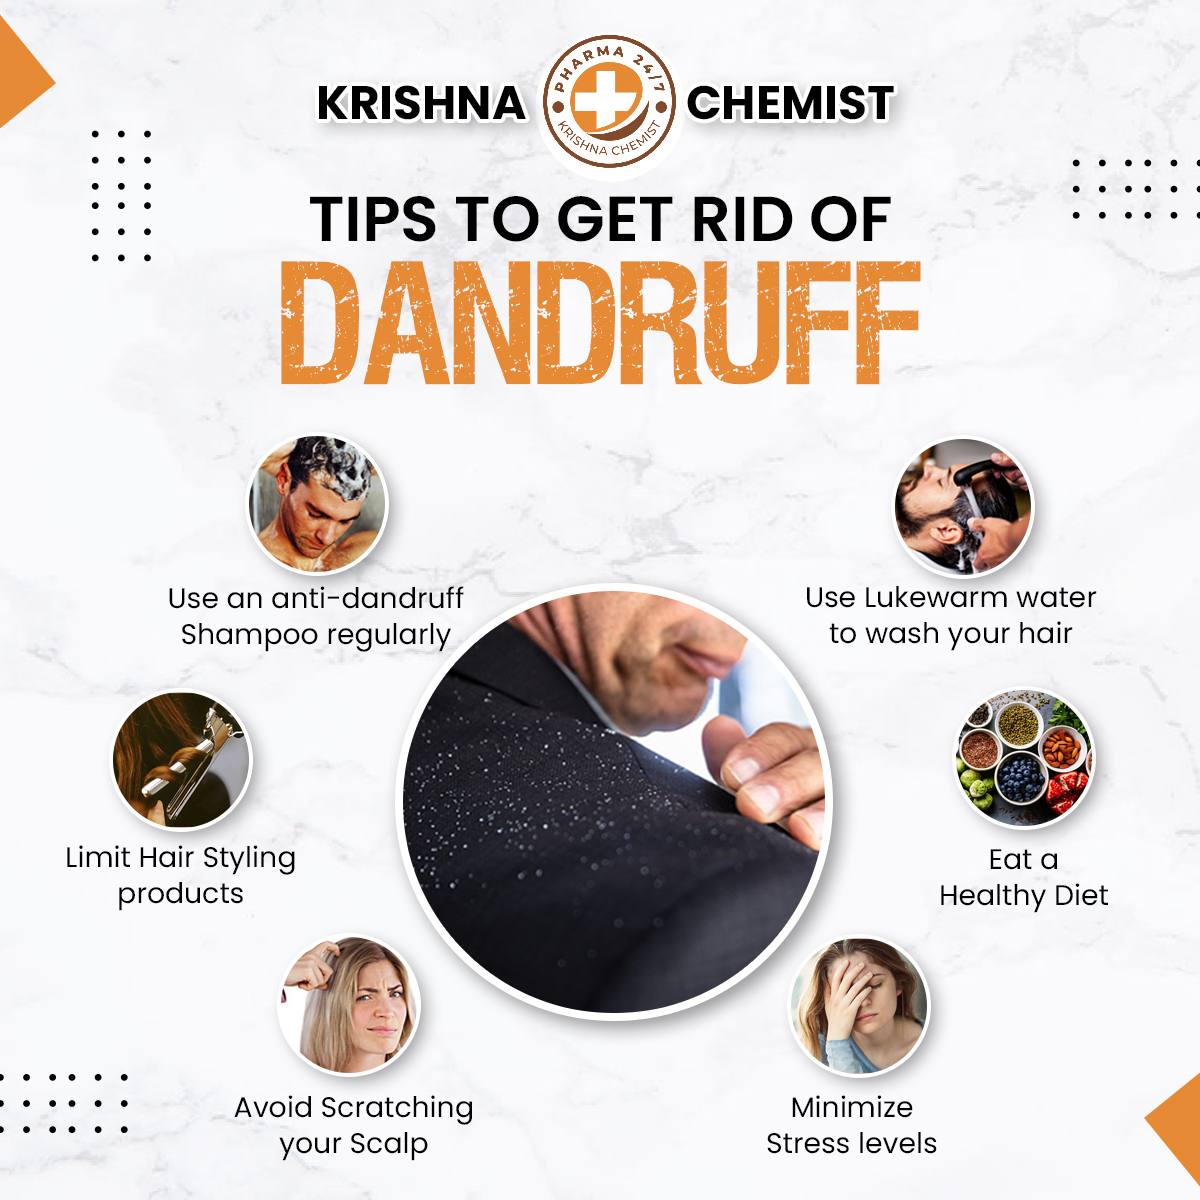 🌿 Say Goodbye to Dandruff! 🌿

Struggling with dandruff? Krishna Chemist, your trusted partner in wellness, is here to help you banish those pesky flakes once and for all! 😊💆‍♀️💯

#DandruffFreeHair #KrishnaChemist #HealthyScalp #QualityHairCare #SayGoodbyeToFlakes #ExpertAdvice